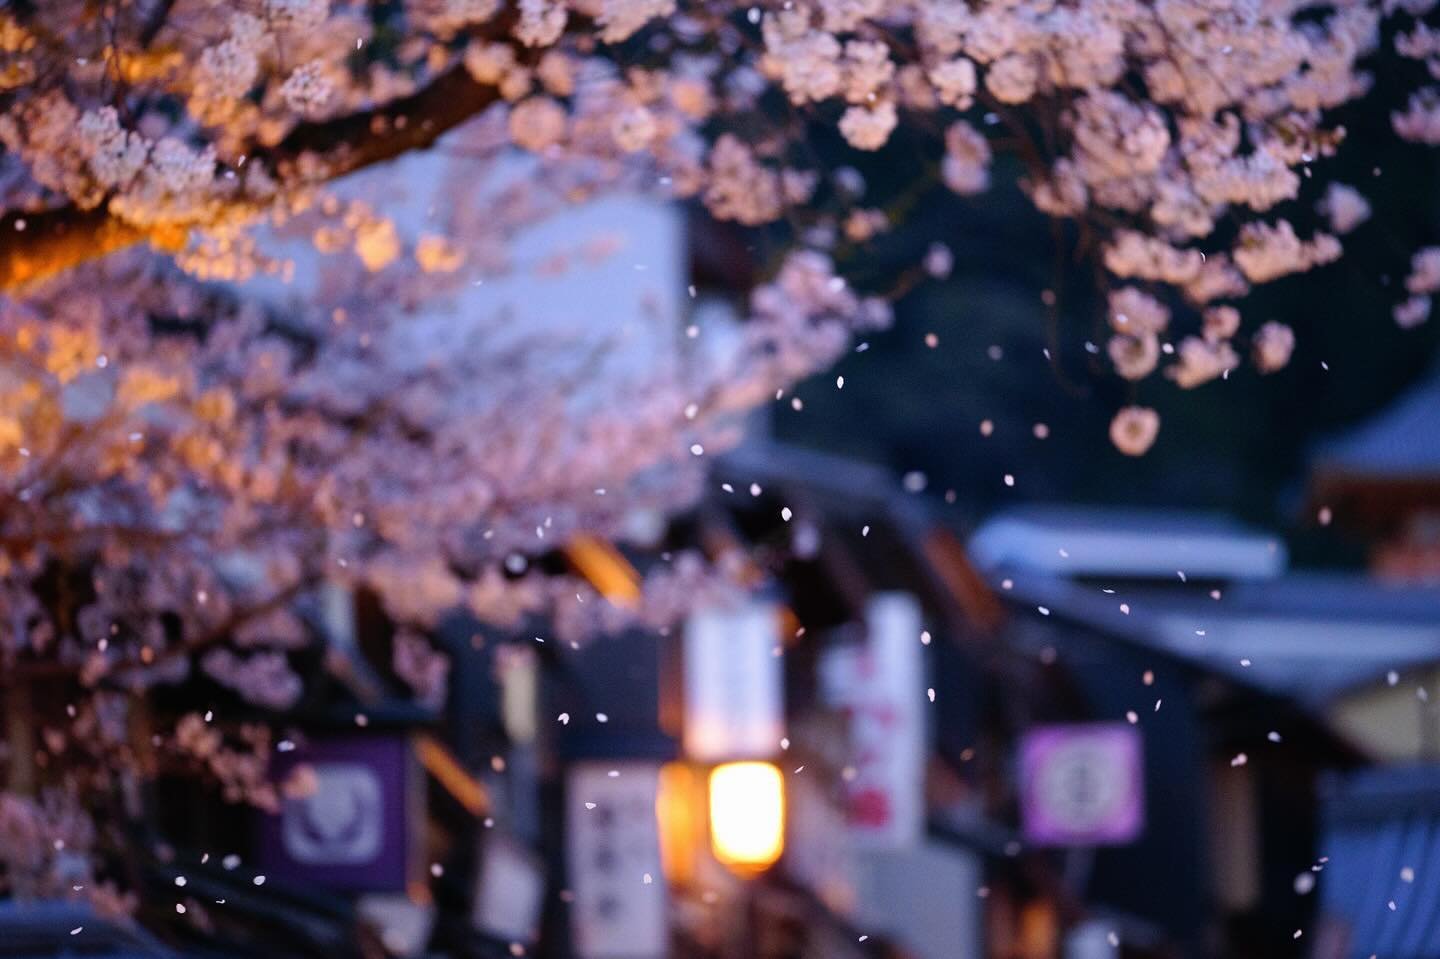 Catching the end of the 🌸 season. 

#sigma #sigmafp #travelgram #visitjapanhknow